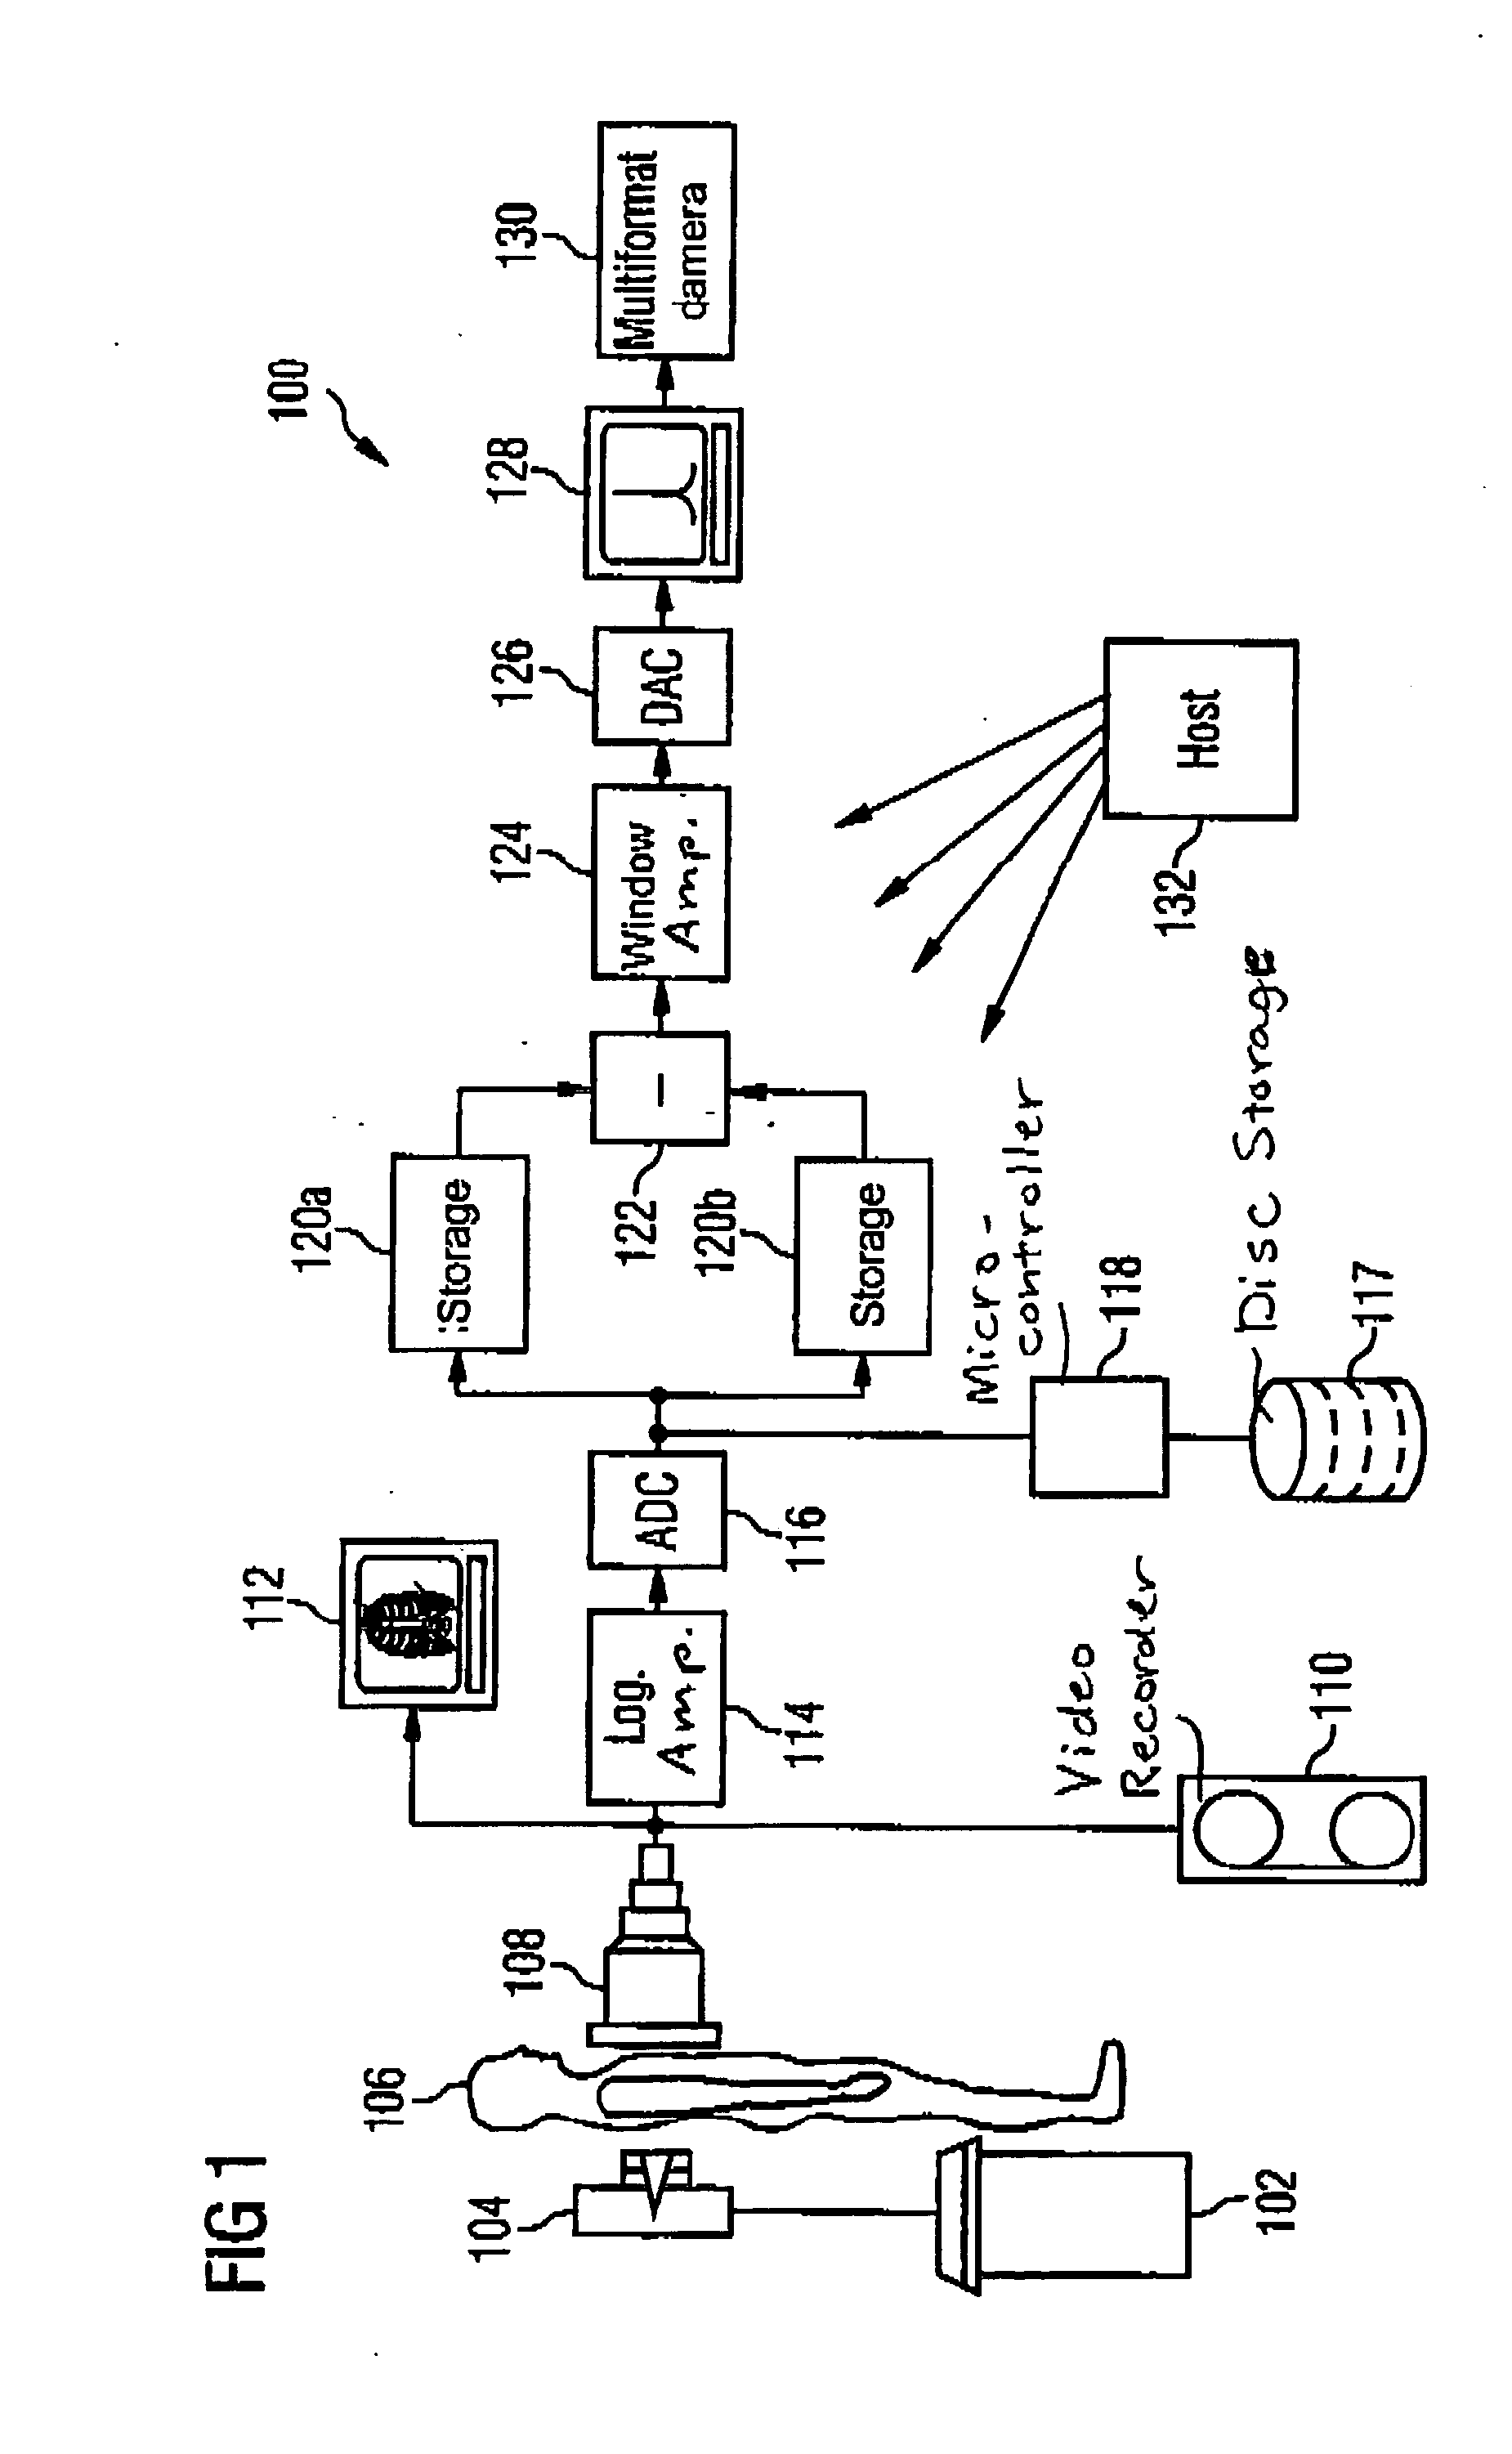 Method and apparatus for visualization of 2D/3D fused image data for catheter angiography